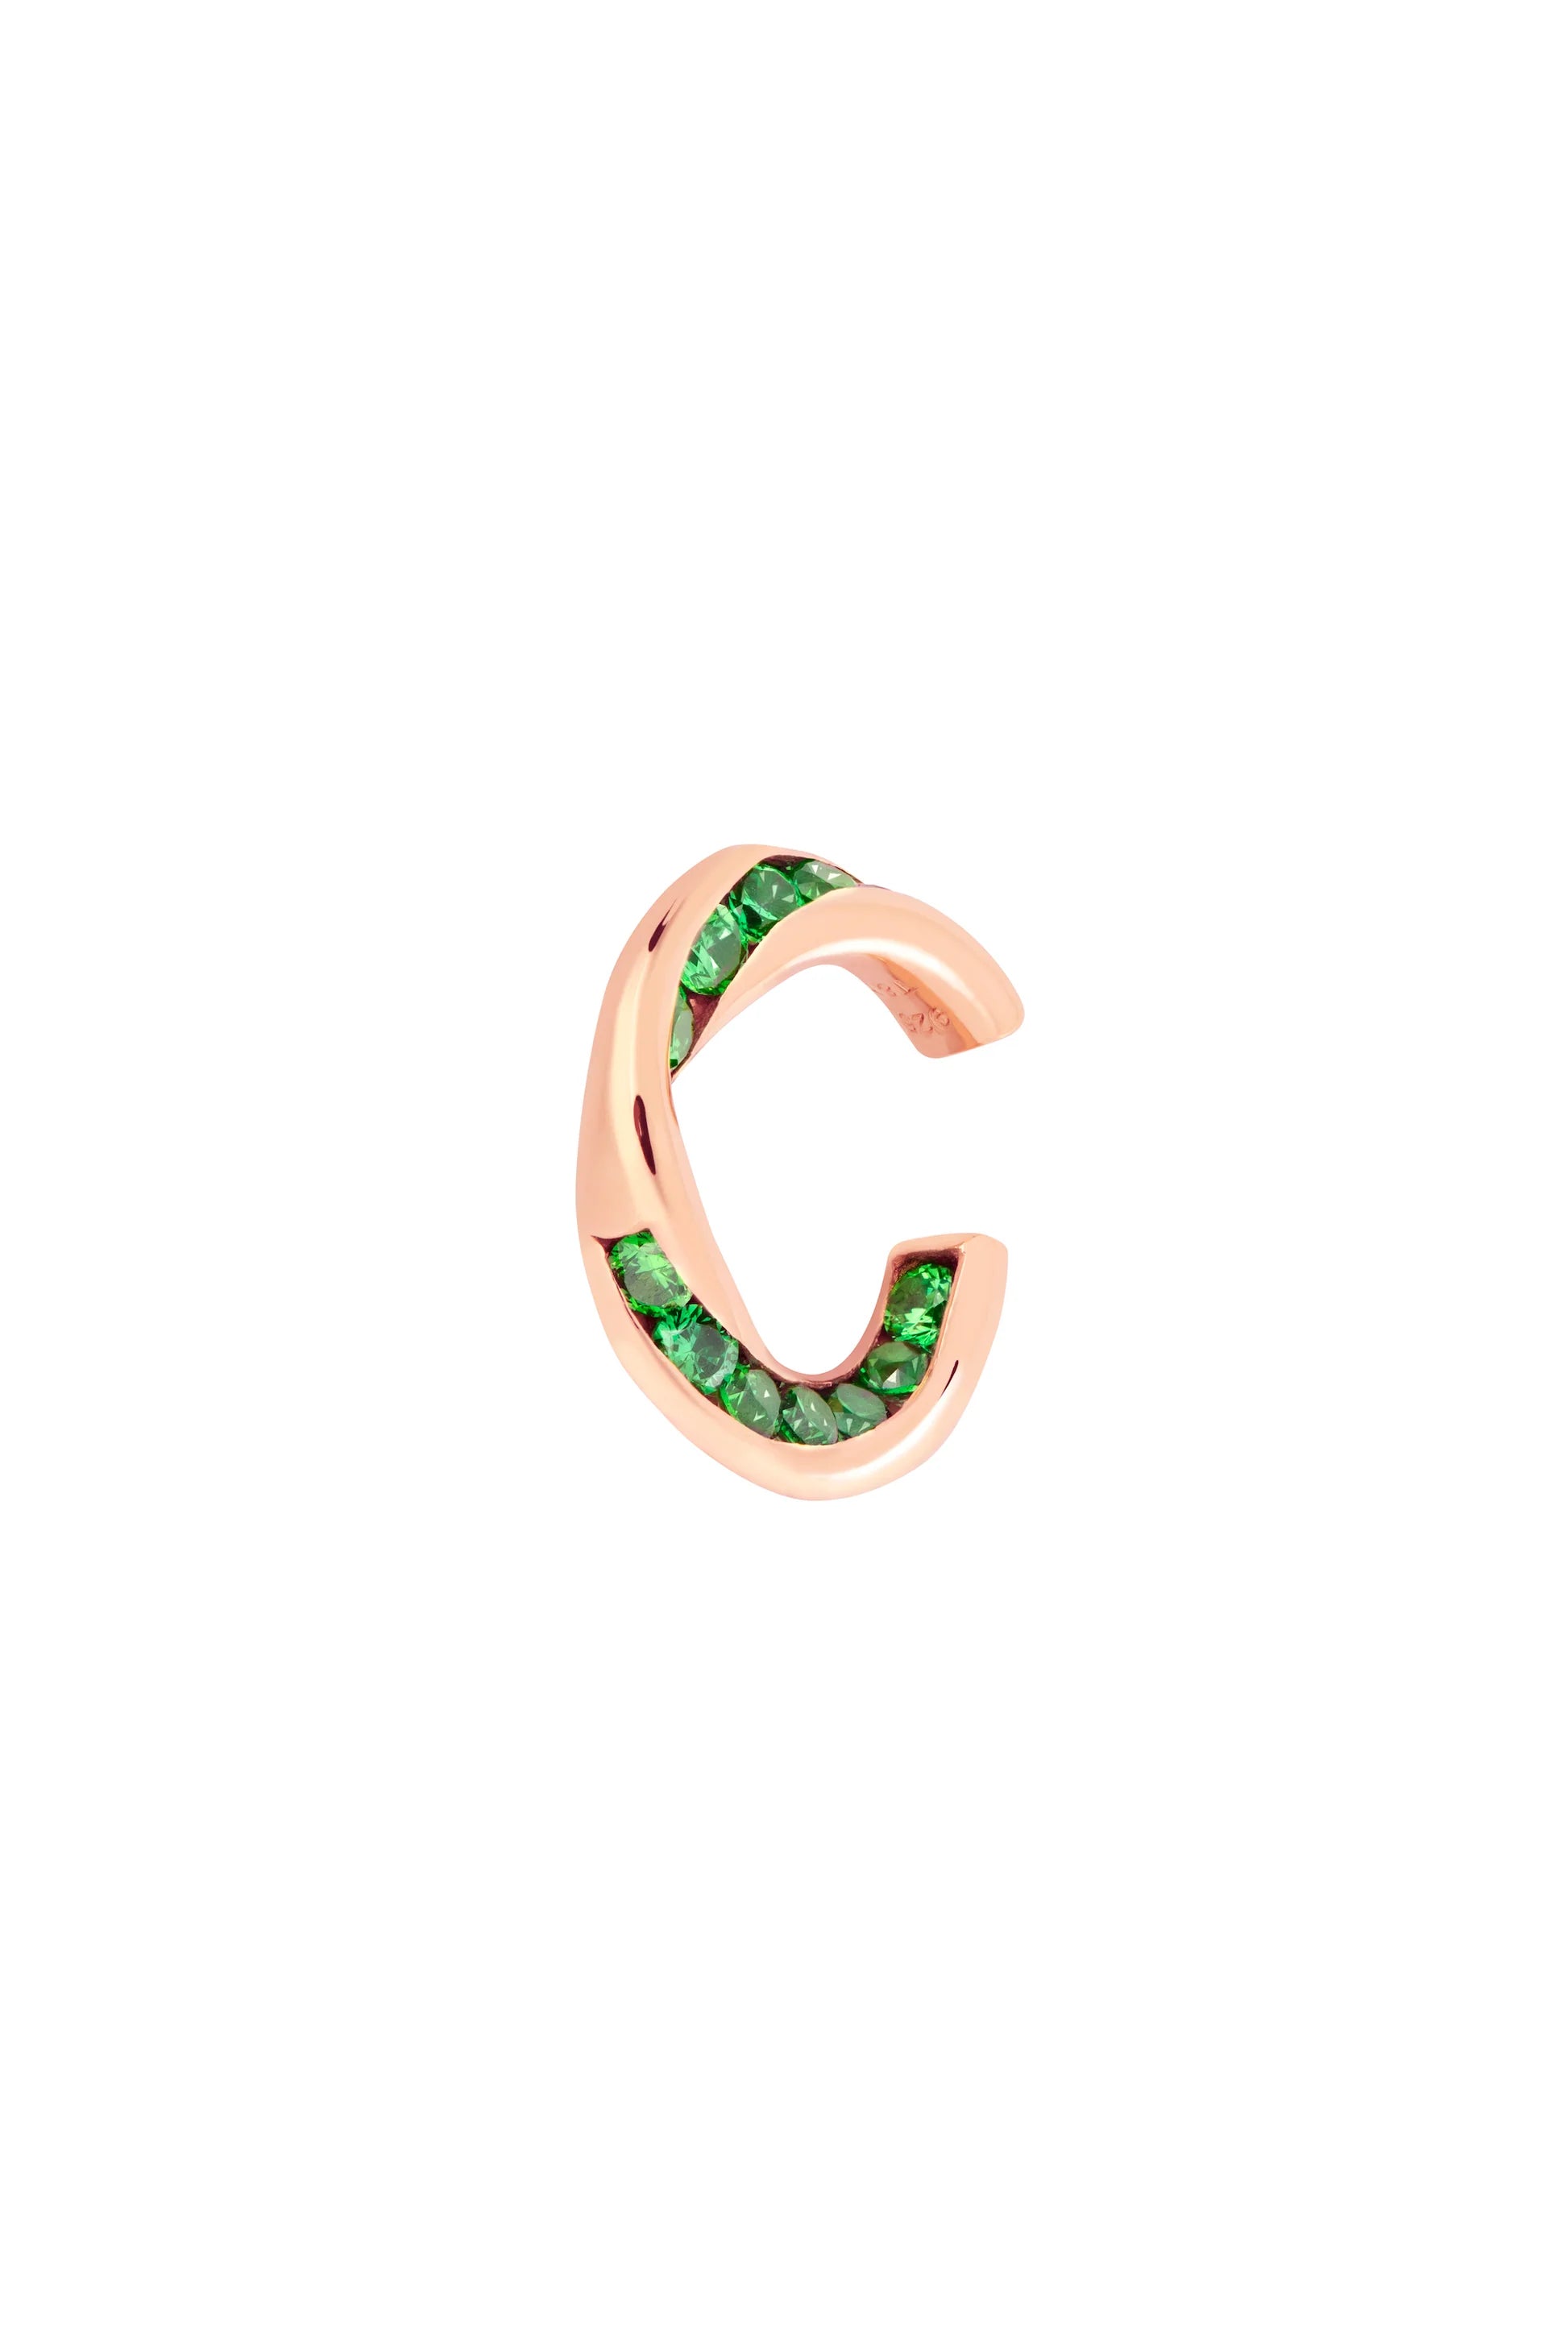 A glittering Treasure Cuff - Rose Gold with emeralds, featuring 18ct gold-plated vermeil from Tada & Toy.